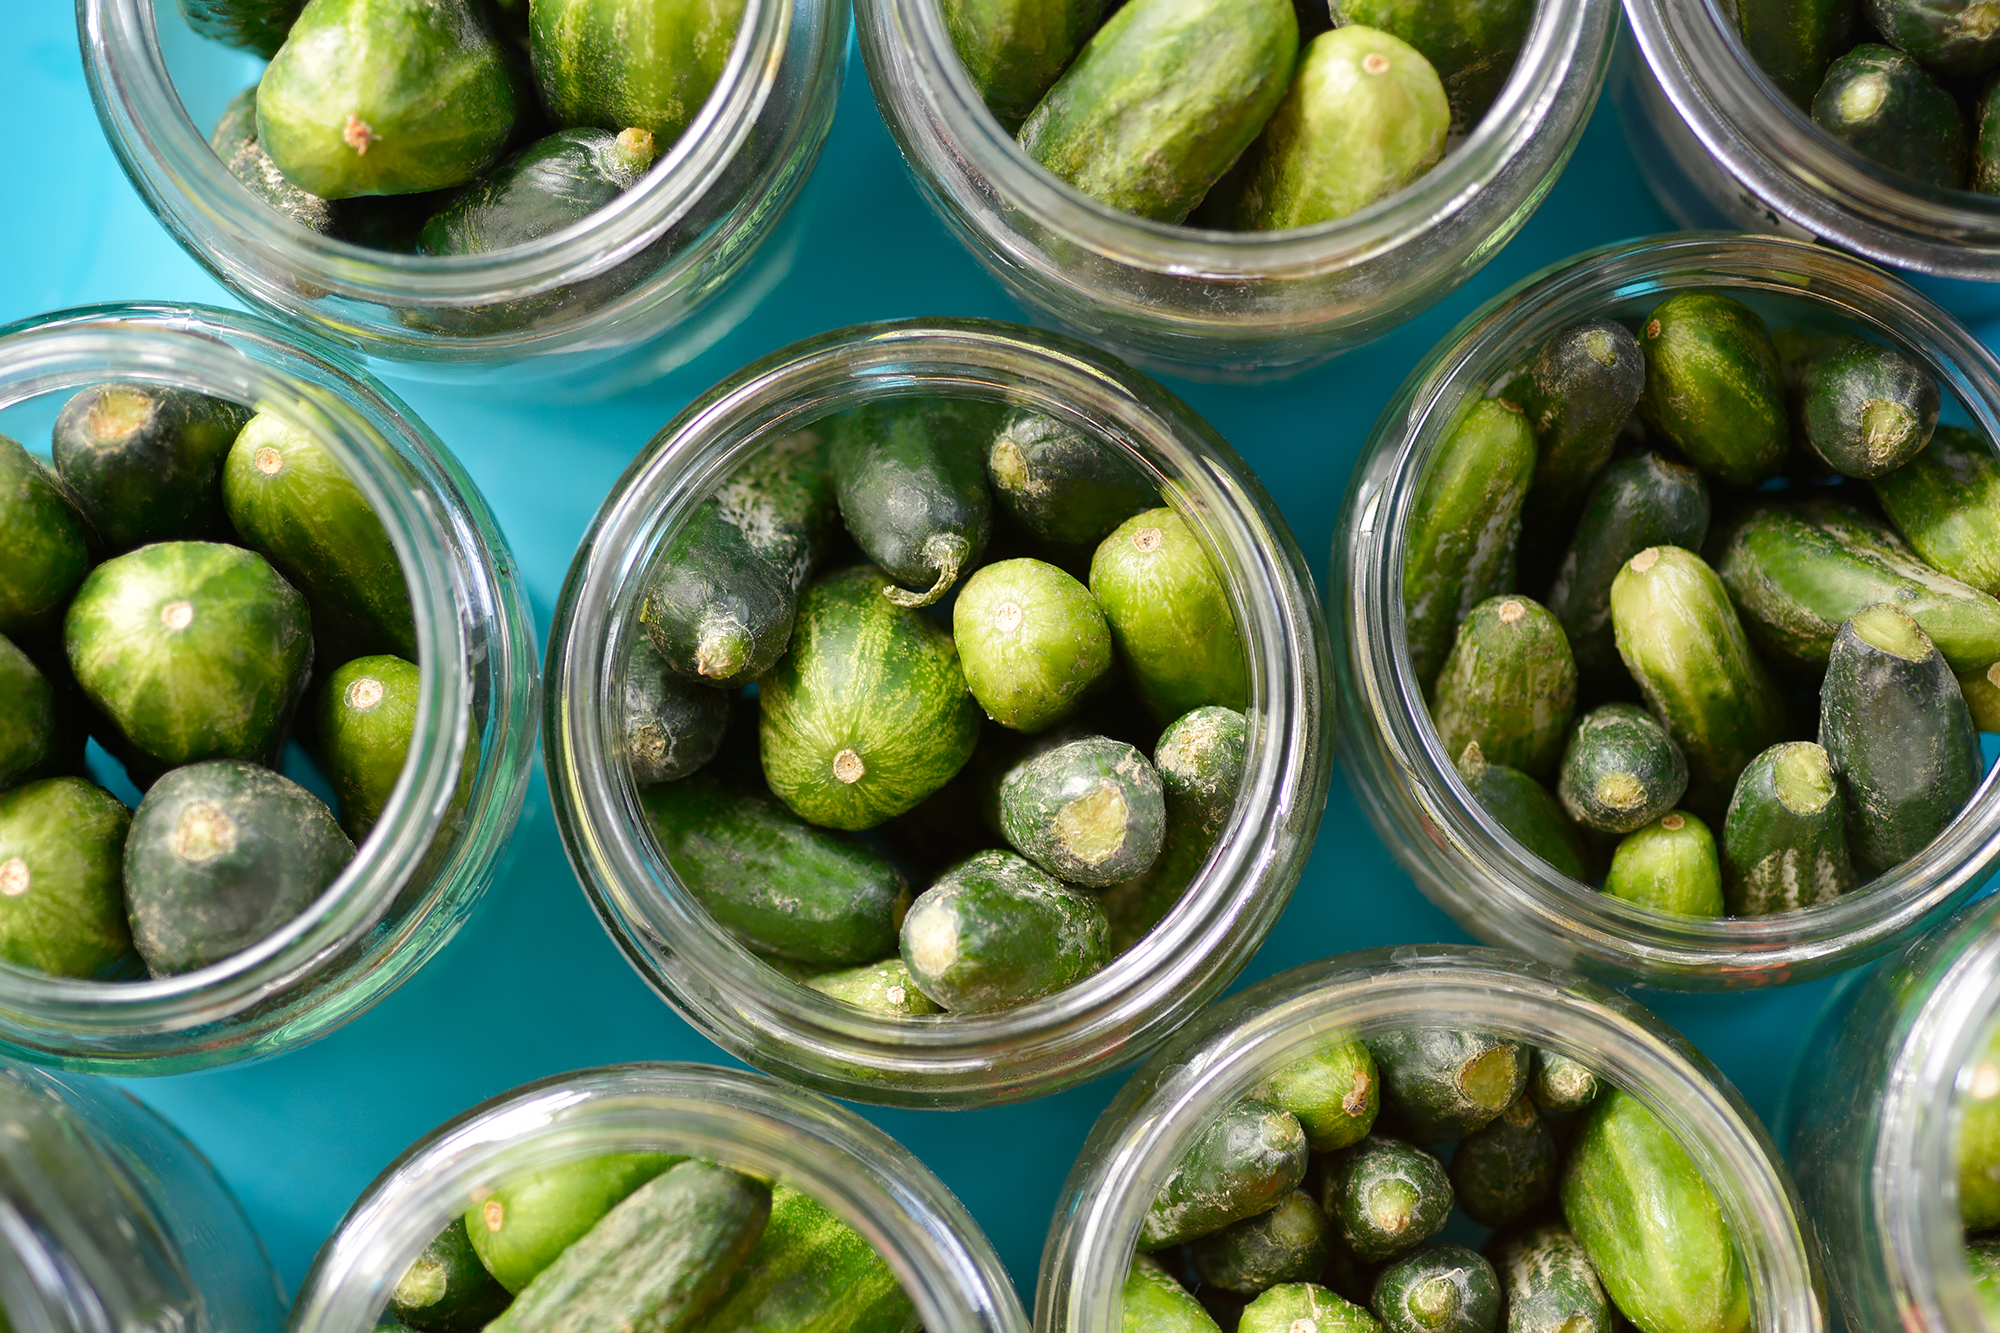 Cucumbers in jars, ready to be pickled